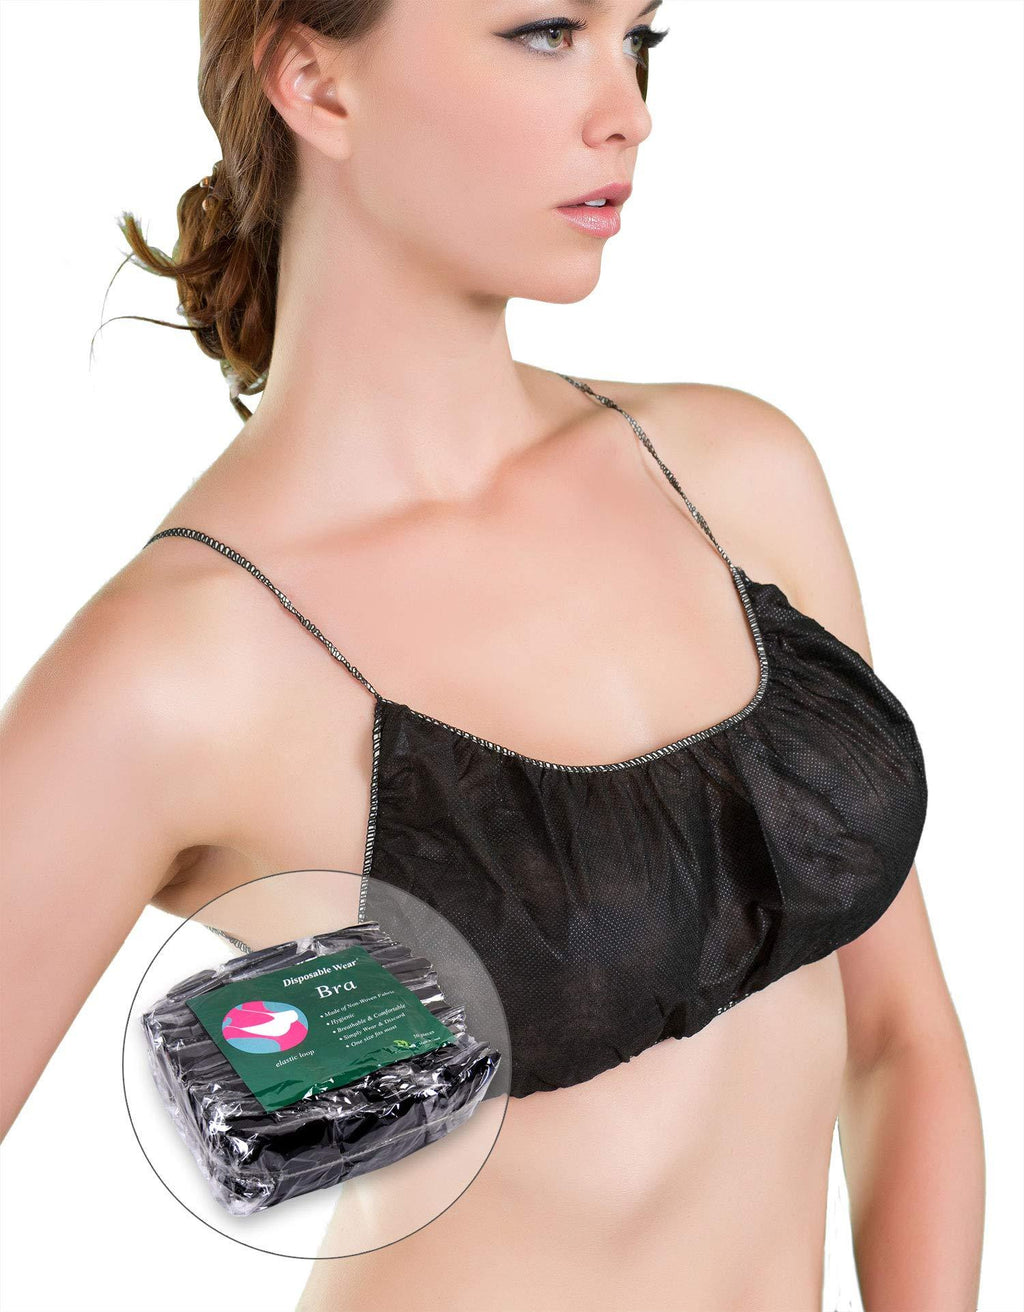 [Australia] - Appearus 50 Ct. Disposable Bras - Women's Disposable Spa Top Underwear Brassieres for Spray Tanning, Individually Pack (Black/DB101BLK) 